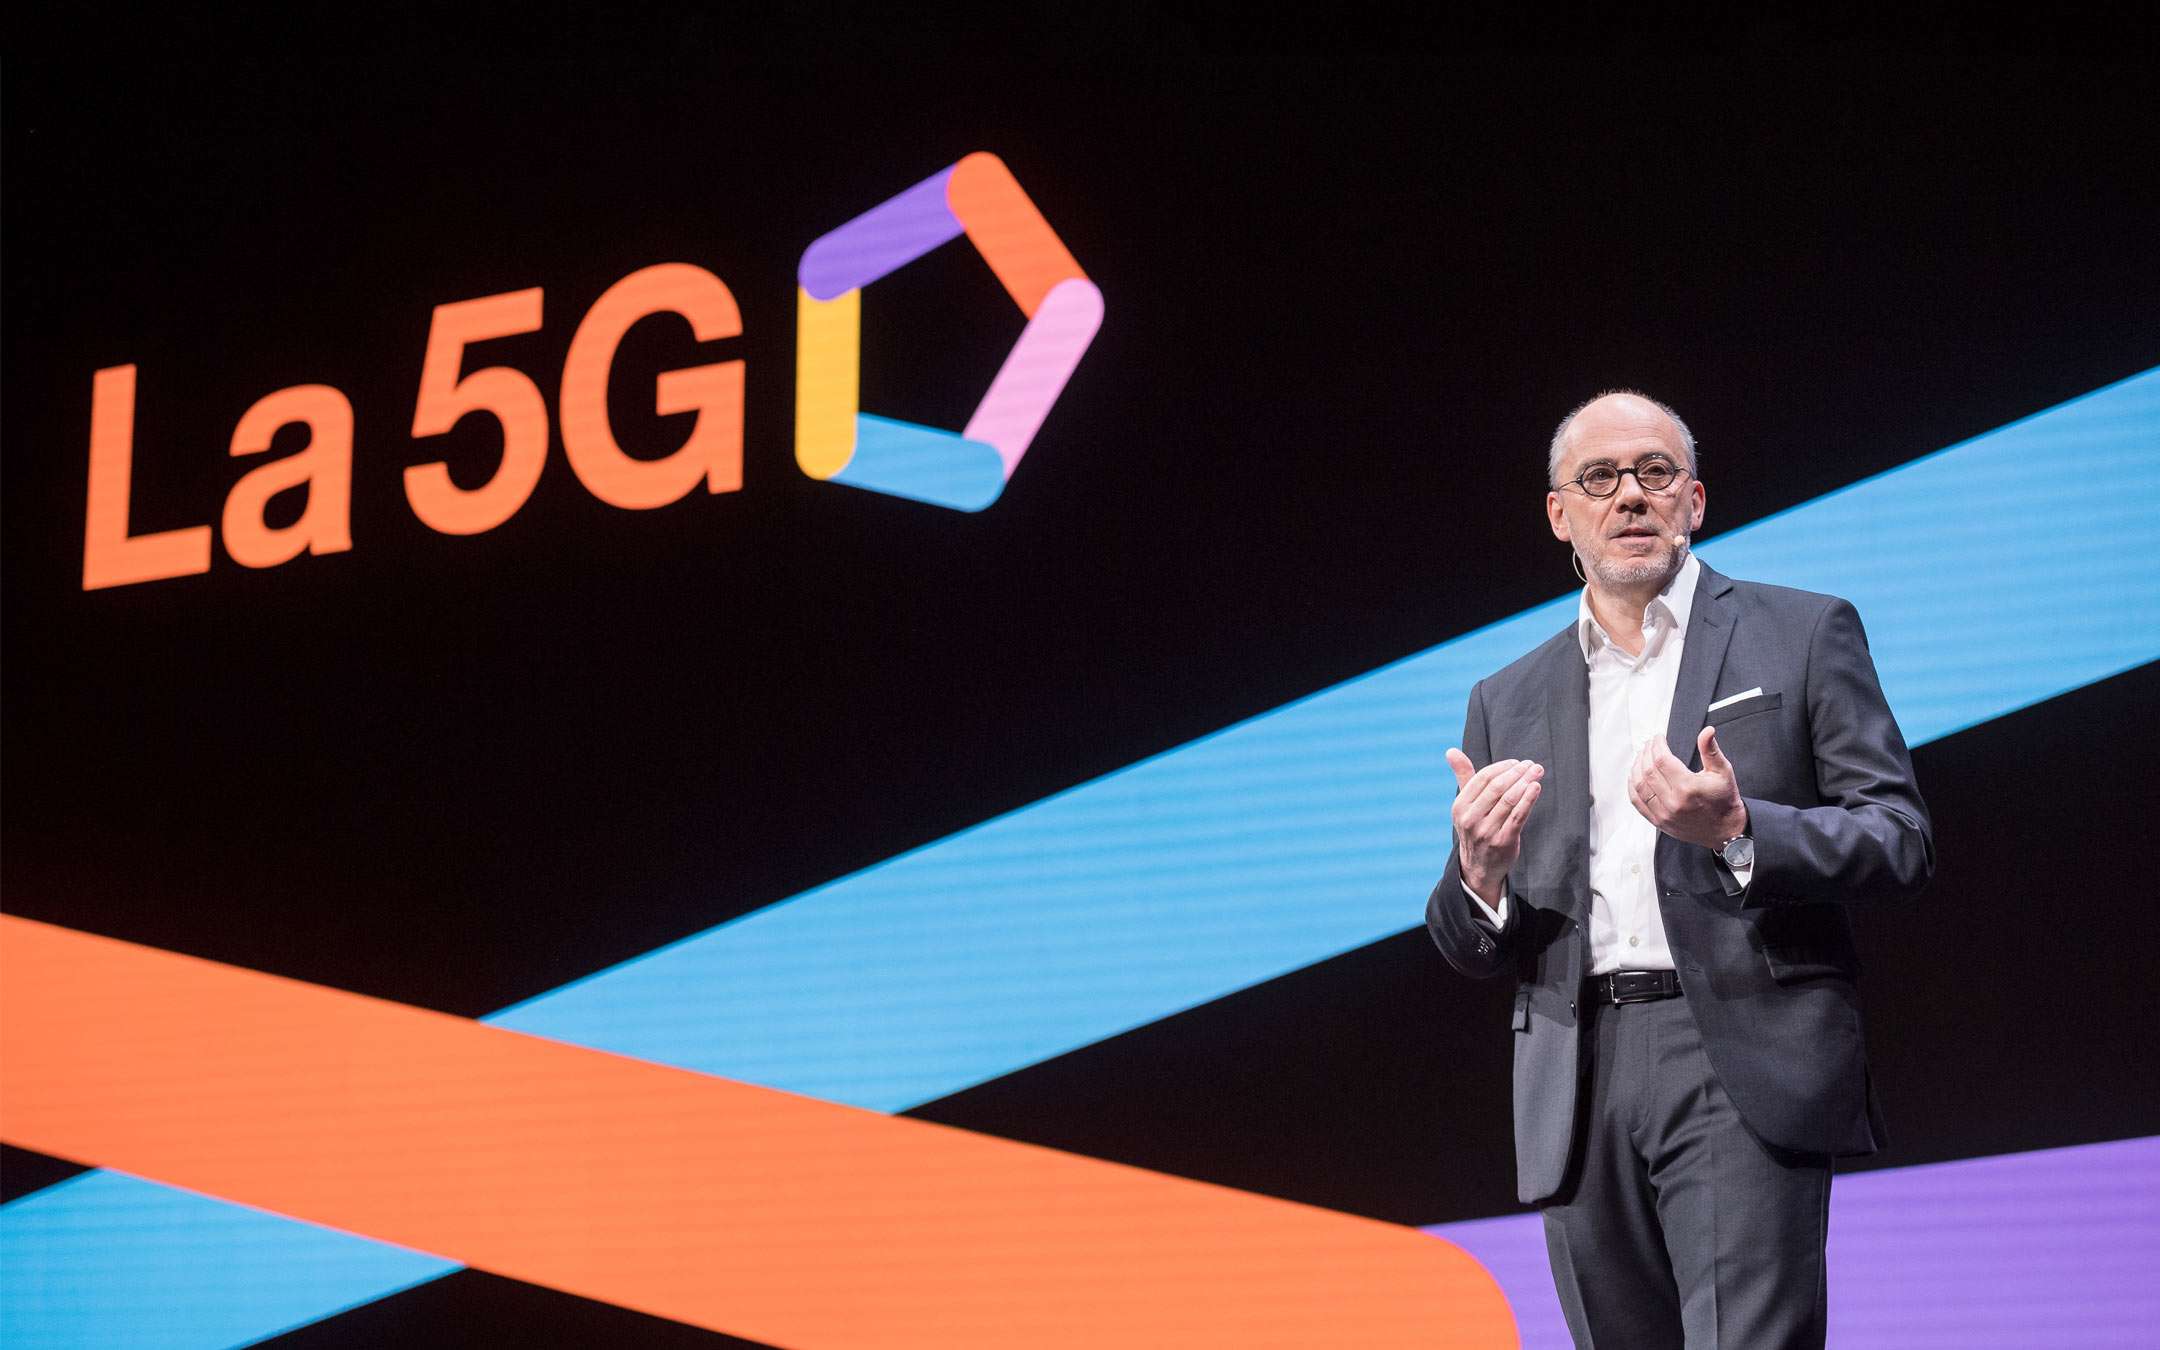 5G: Orange will employ less Huawei technology